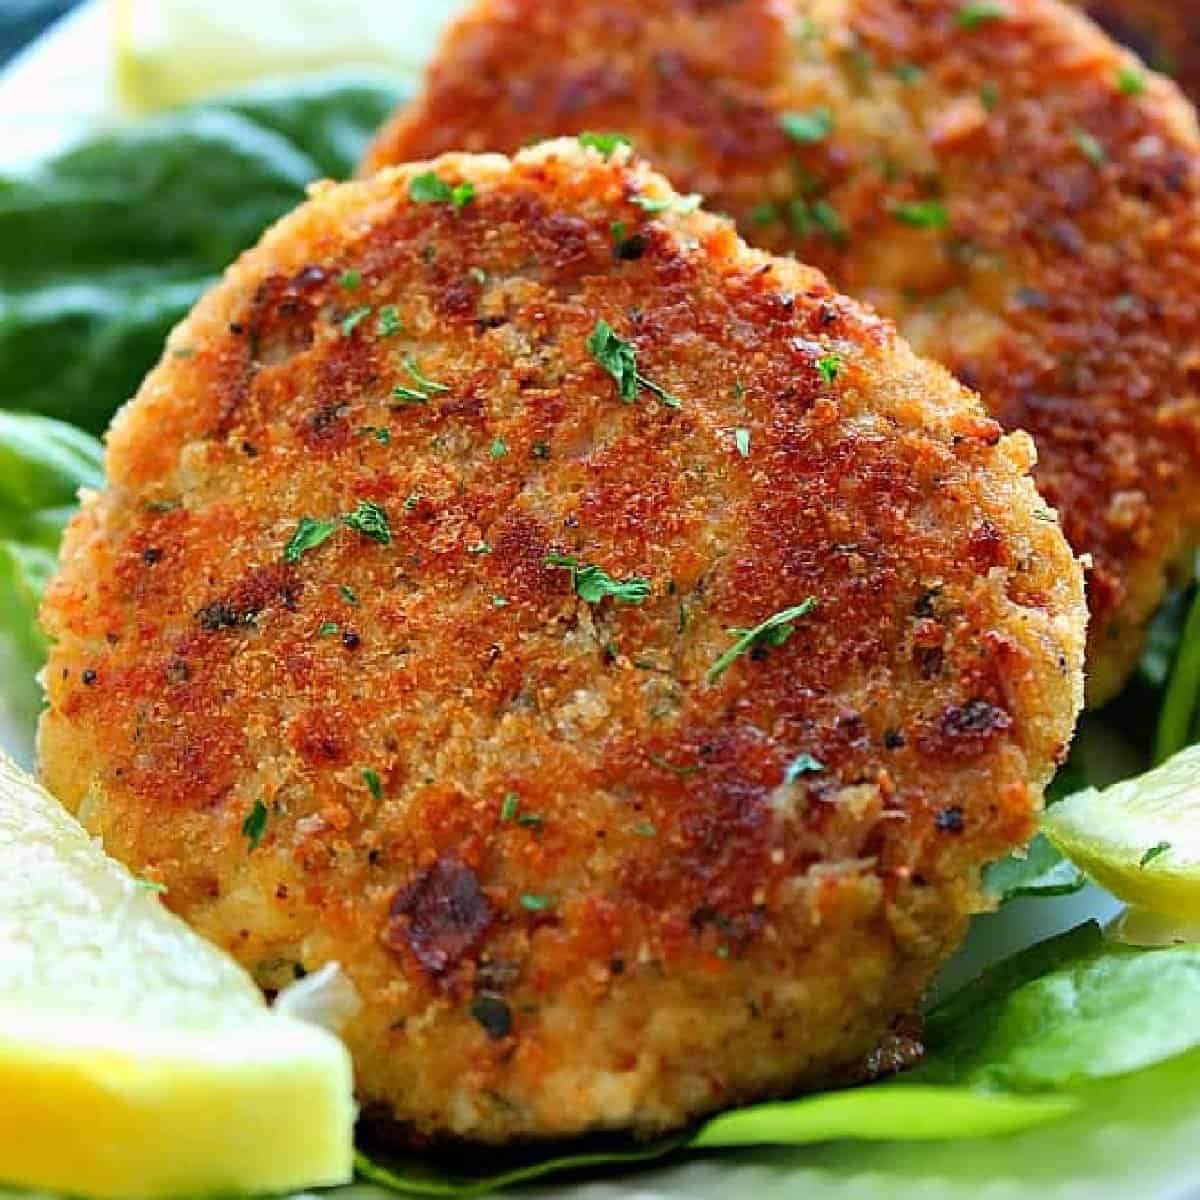 Square image of two tuna cakes on lettuce leaves on white plate.